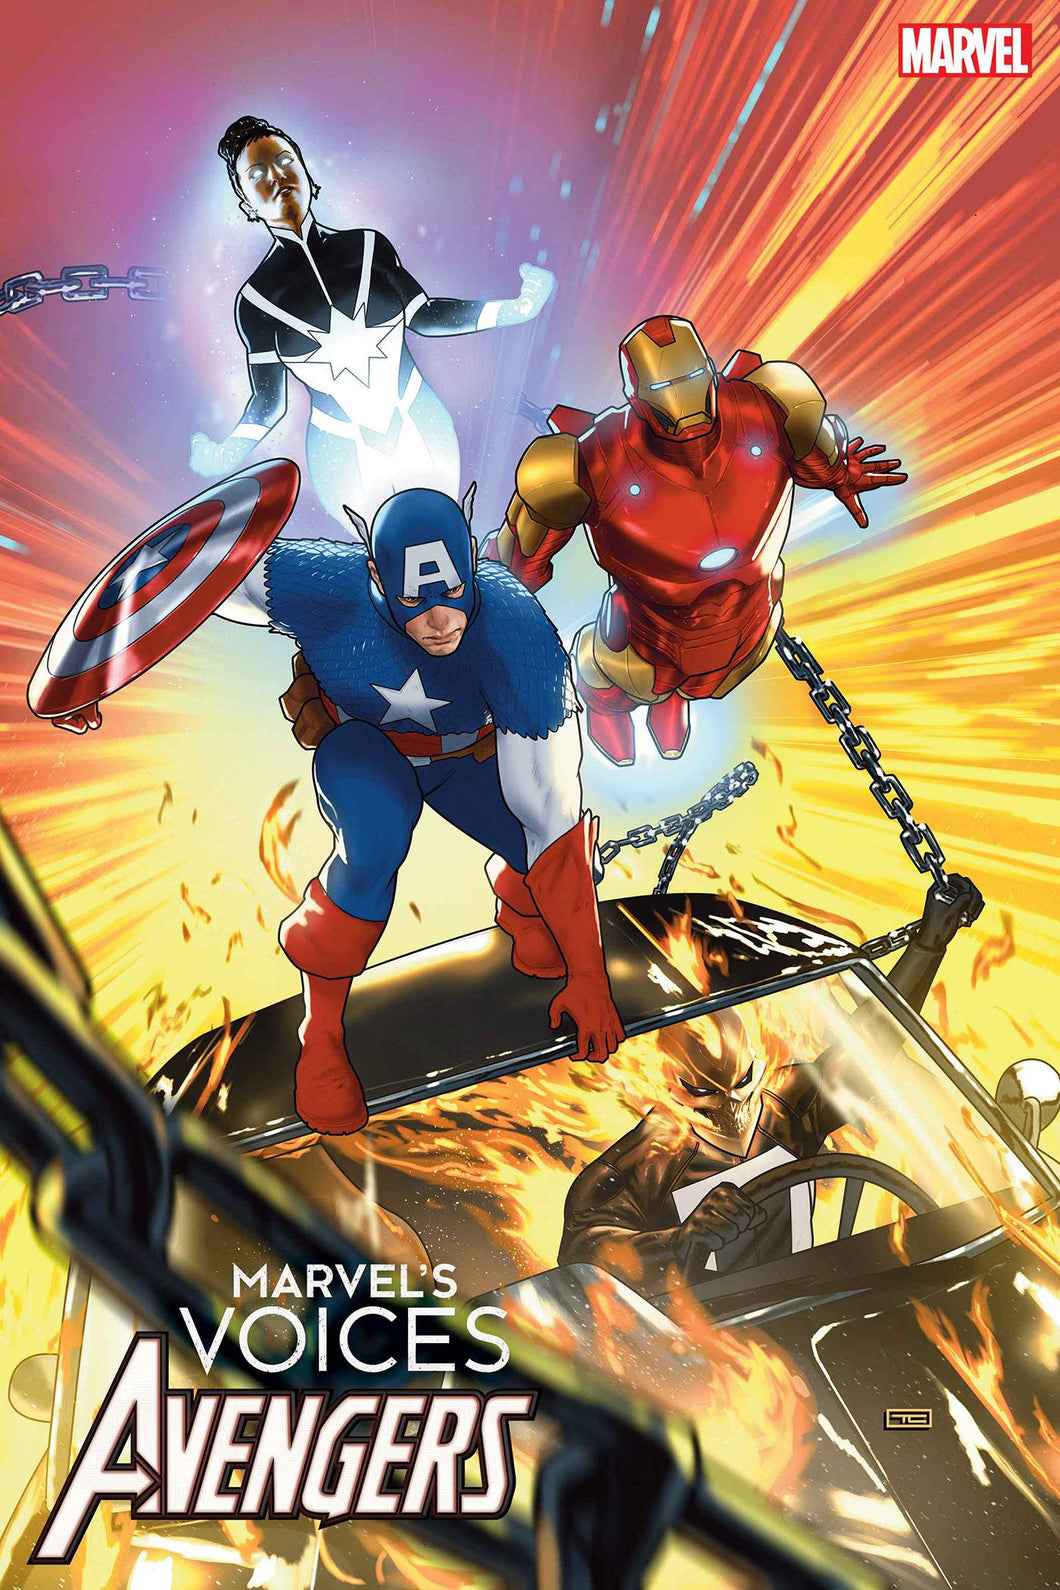 MARVELS VOICES AVENGERS #1 cover